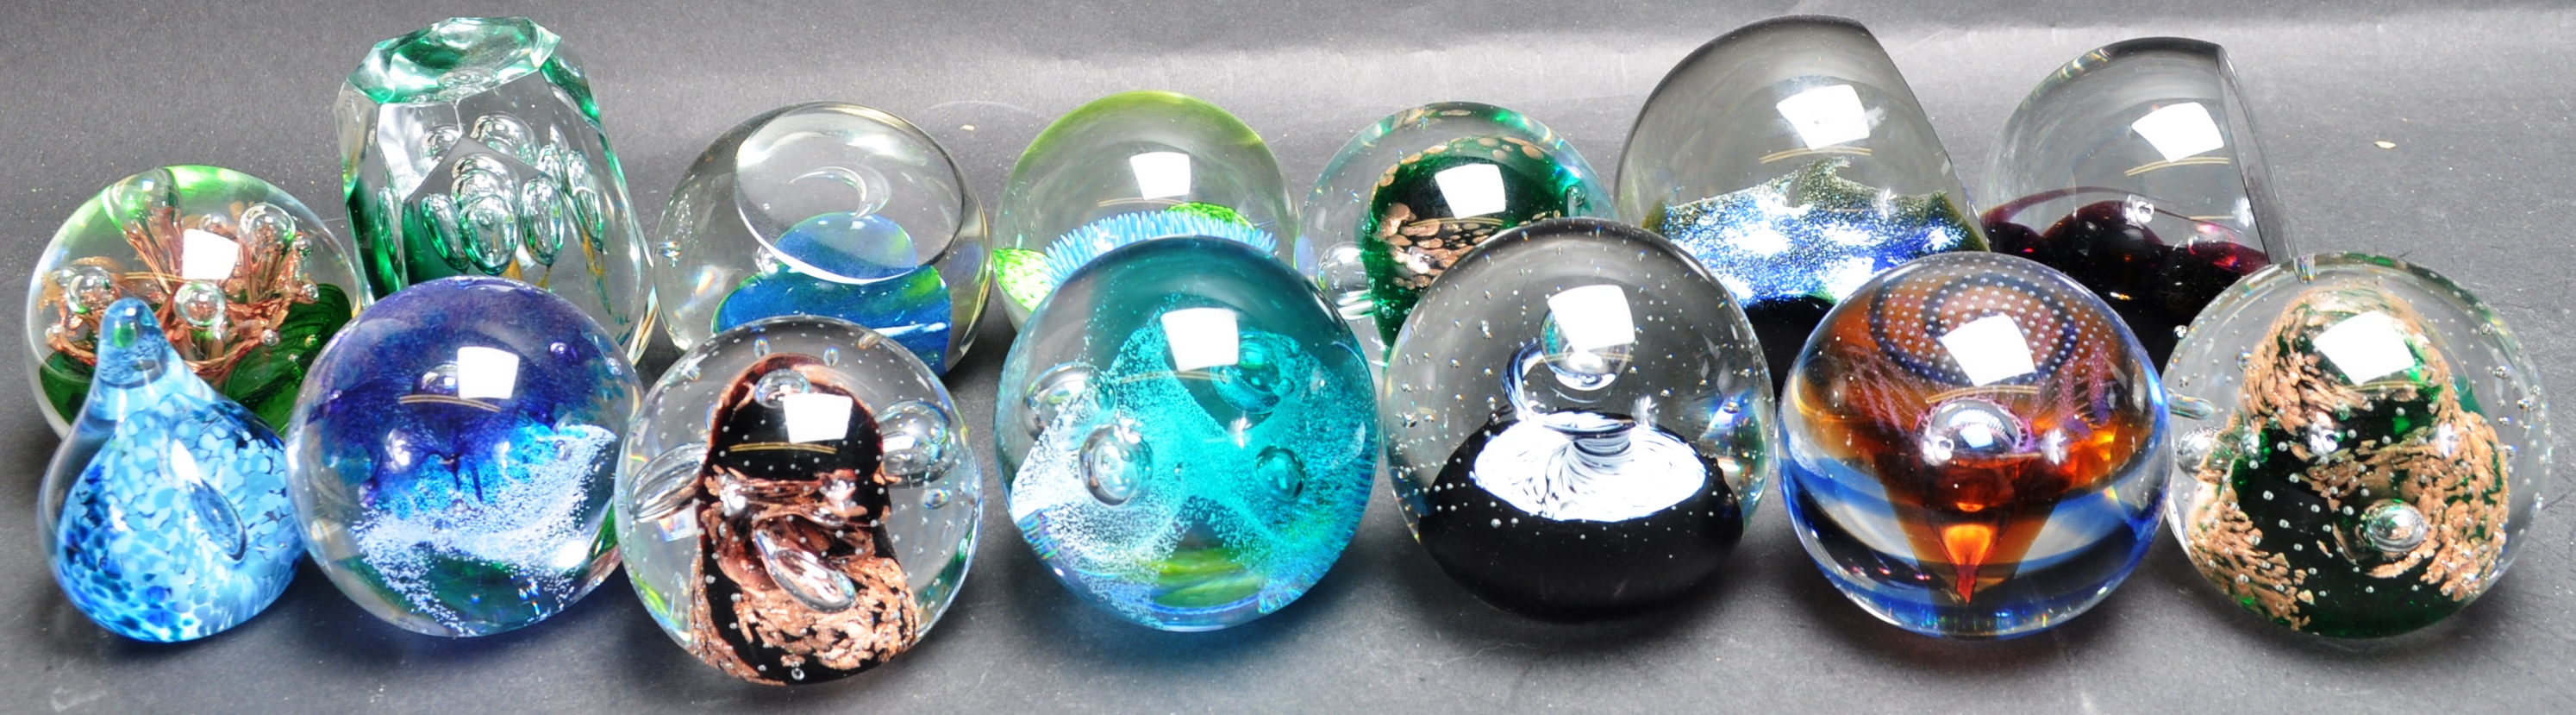 COLLECTION OF 20TH CENTURY CAITHNESS PAPERWEIGHTS. - Image 3 of 6